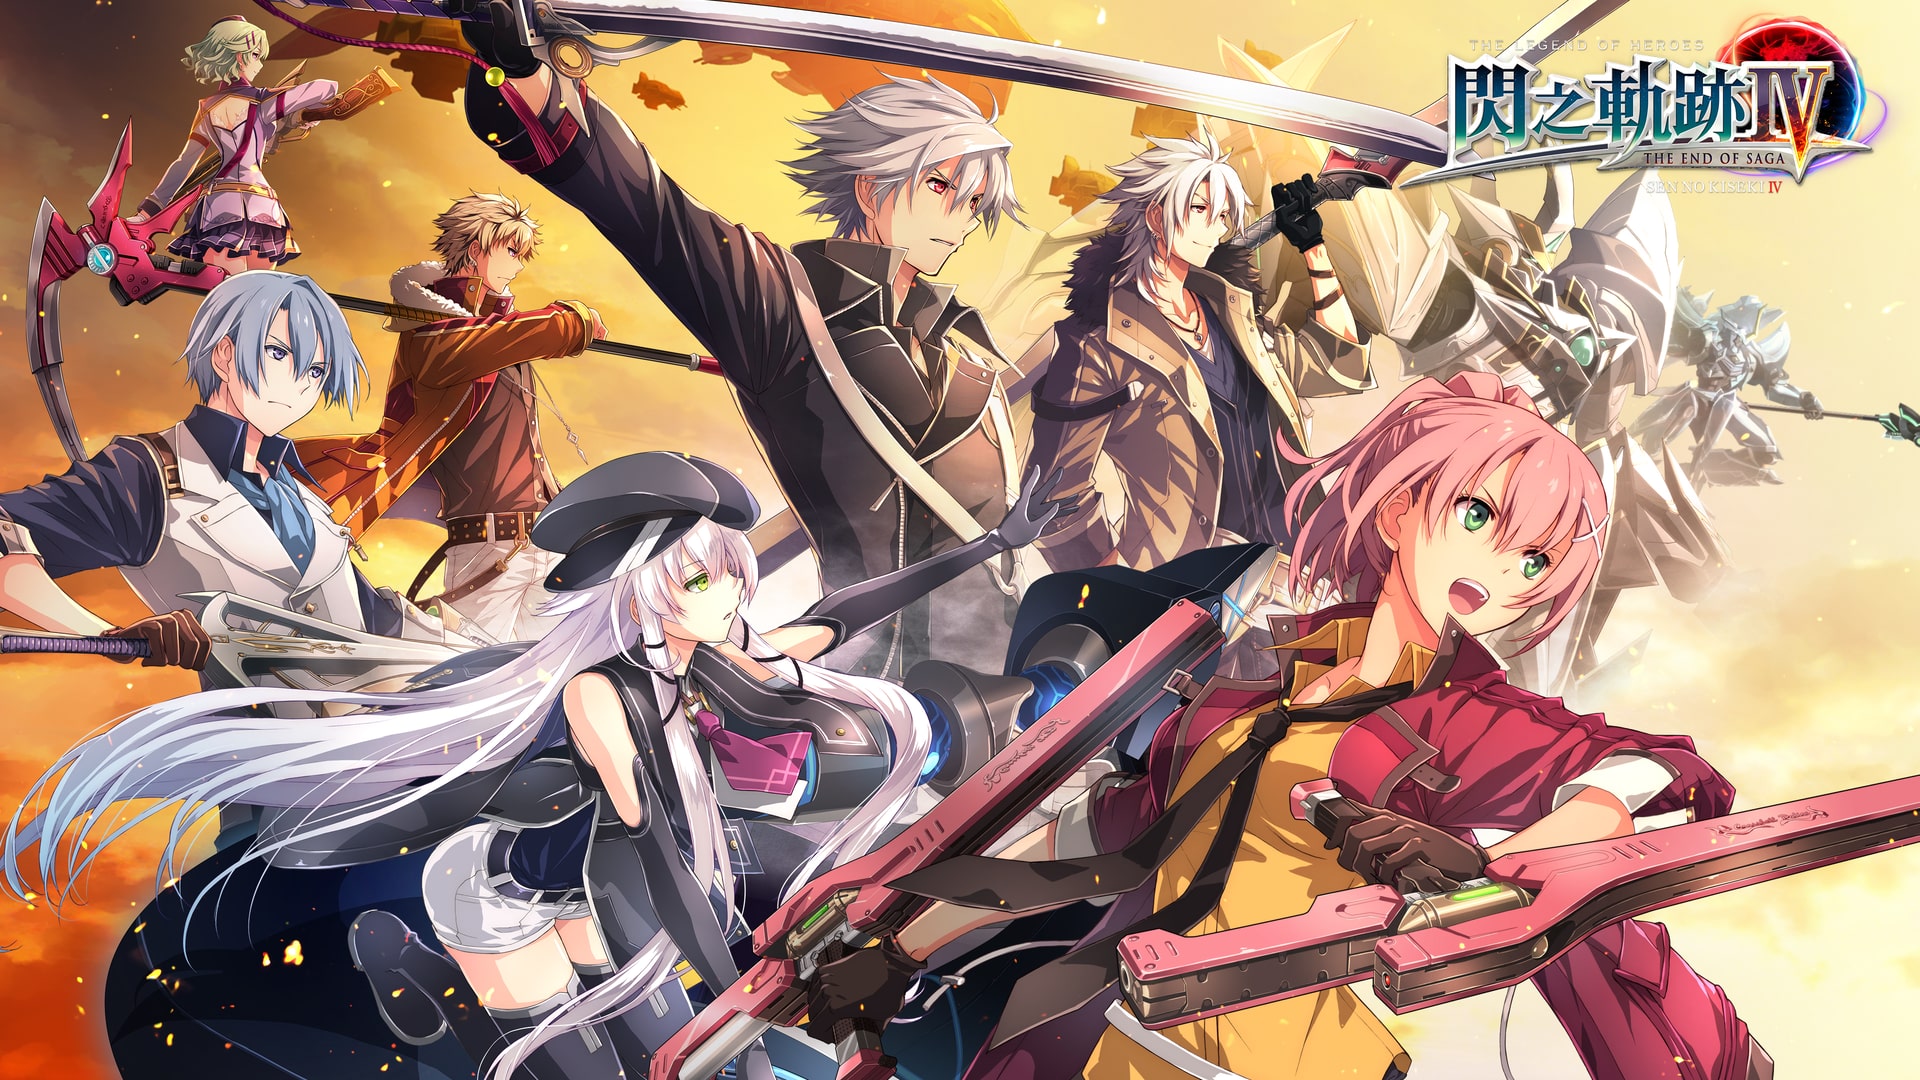 THE LEGEND OF HEROES: SEN NO KISEKI IV Digital Deluxe Edition (Chinese Ver.)